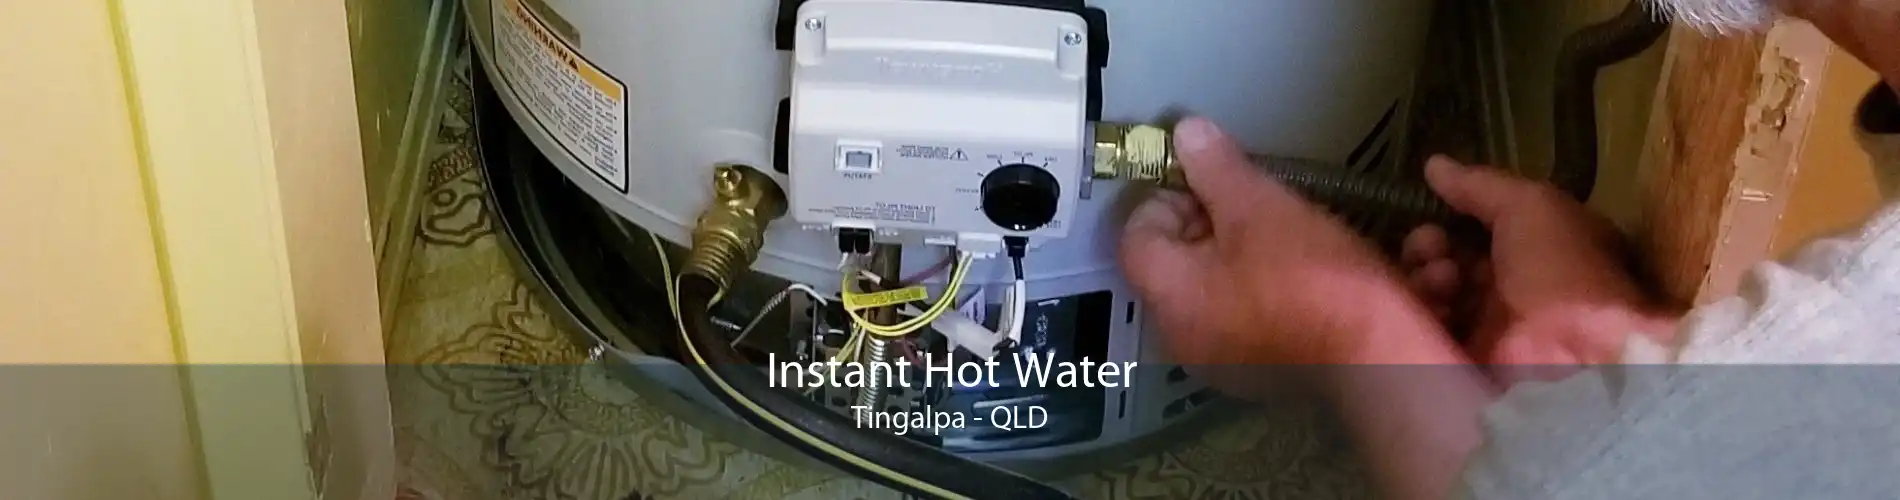 Instant Hot Water Tingalpa - QLD